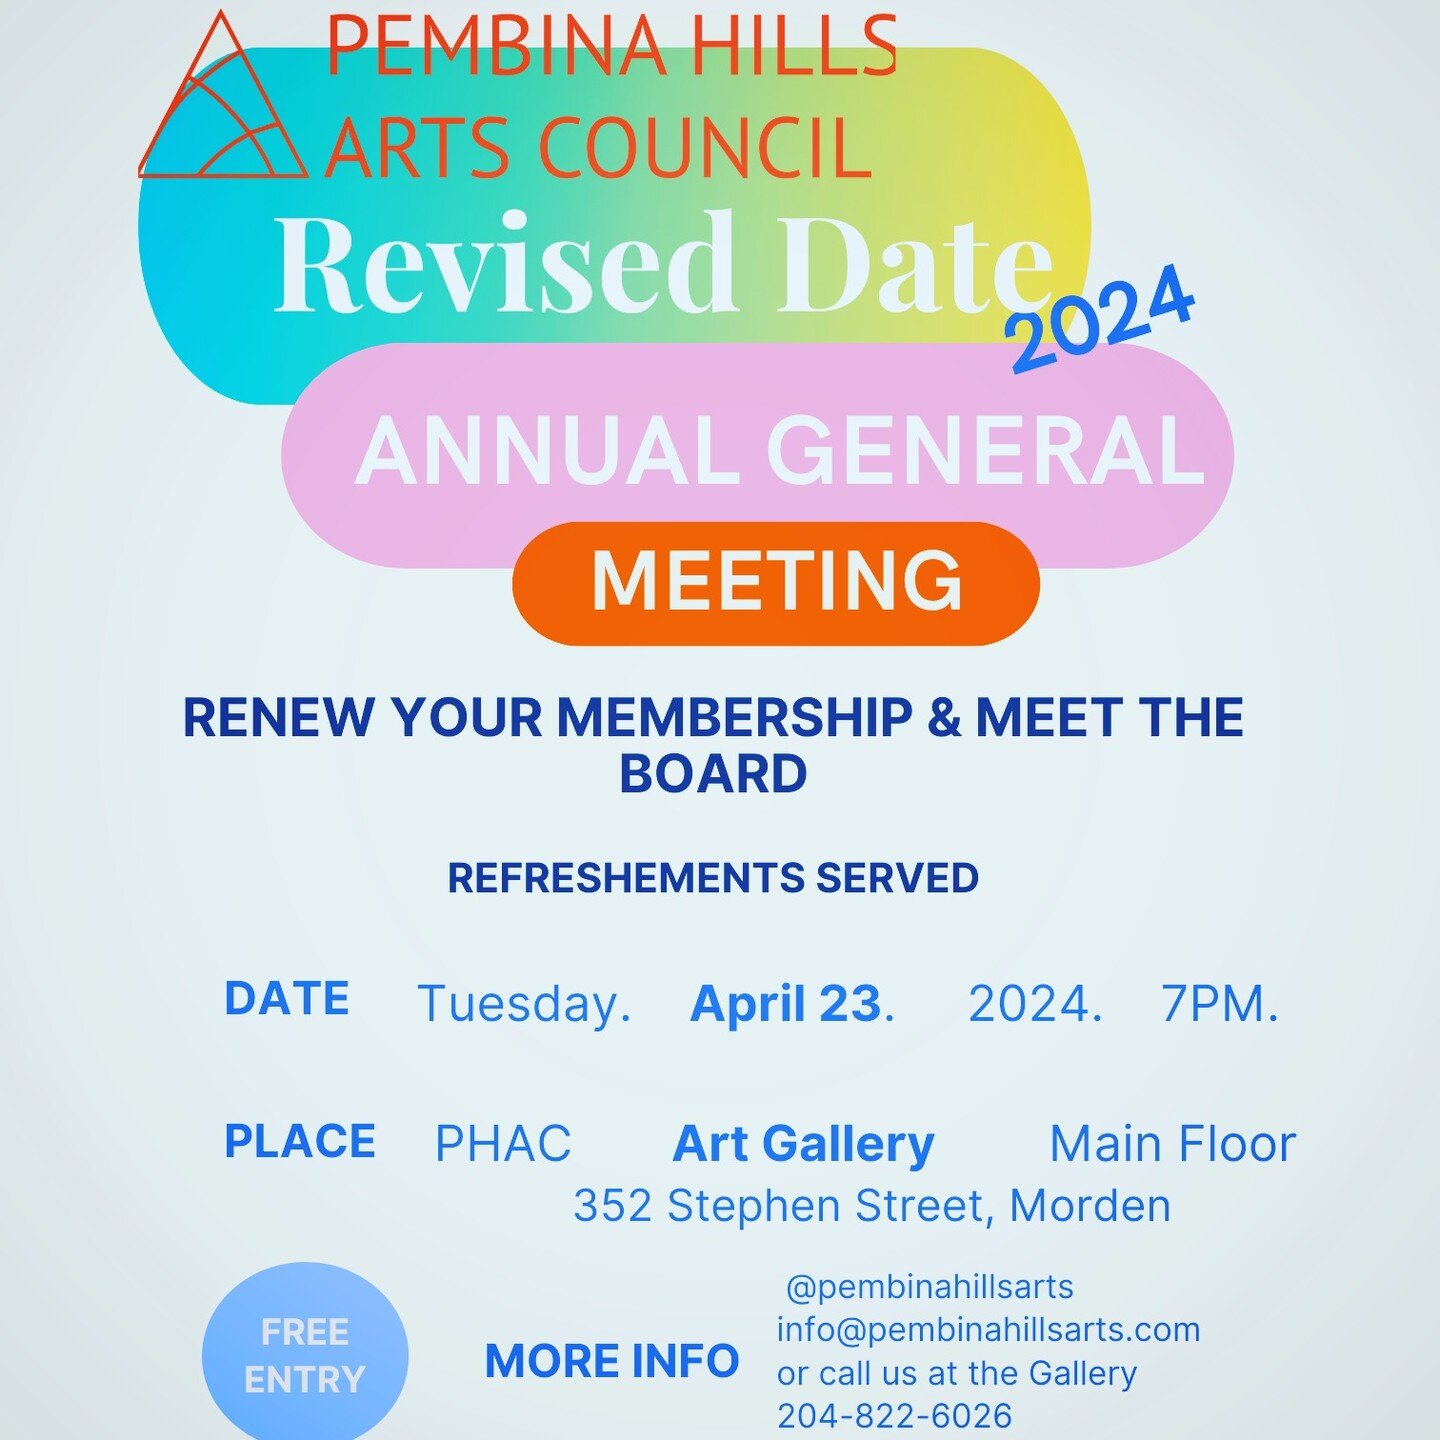 We revised our date for our Annual General Meeting. 
Hope to see you there!